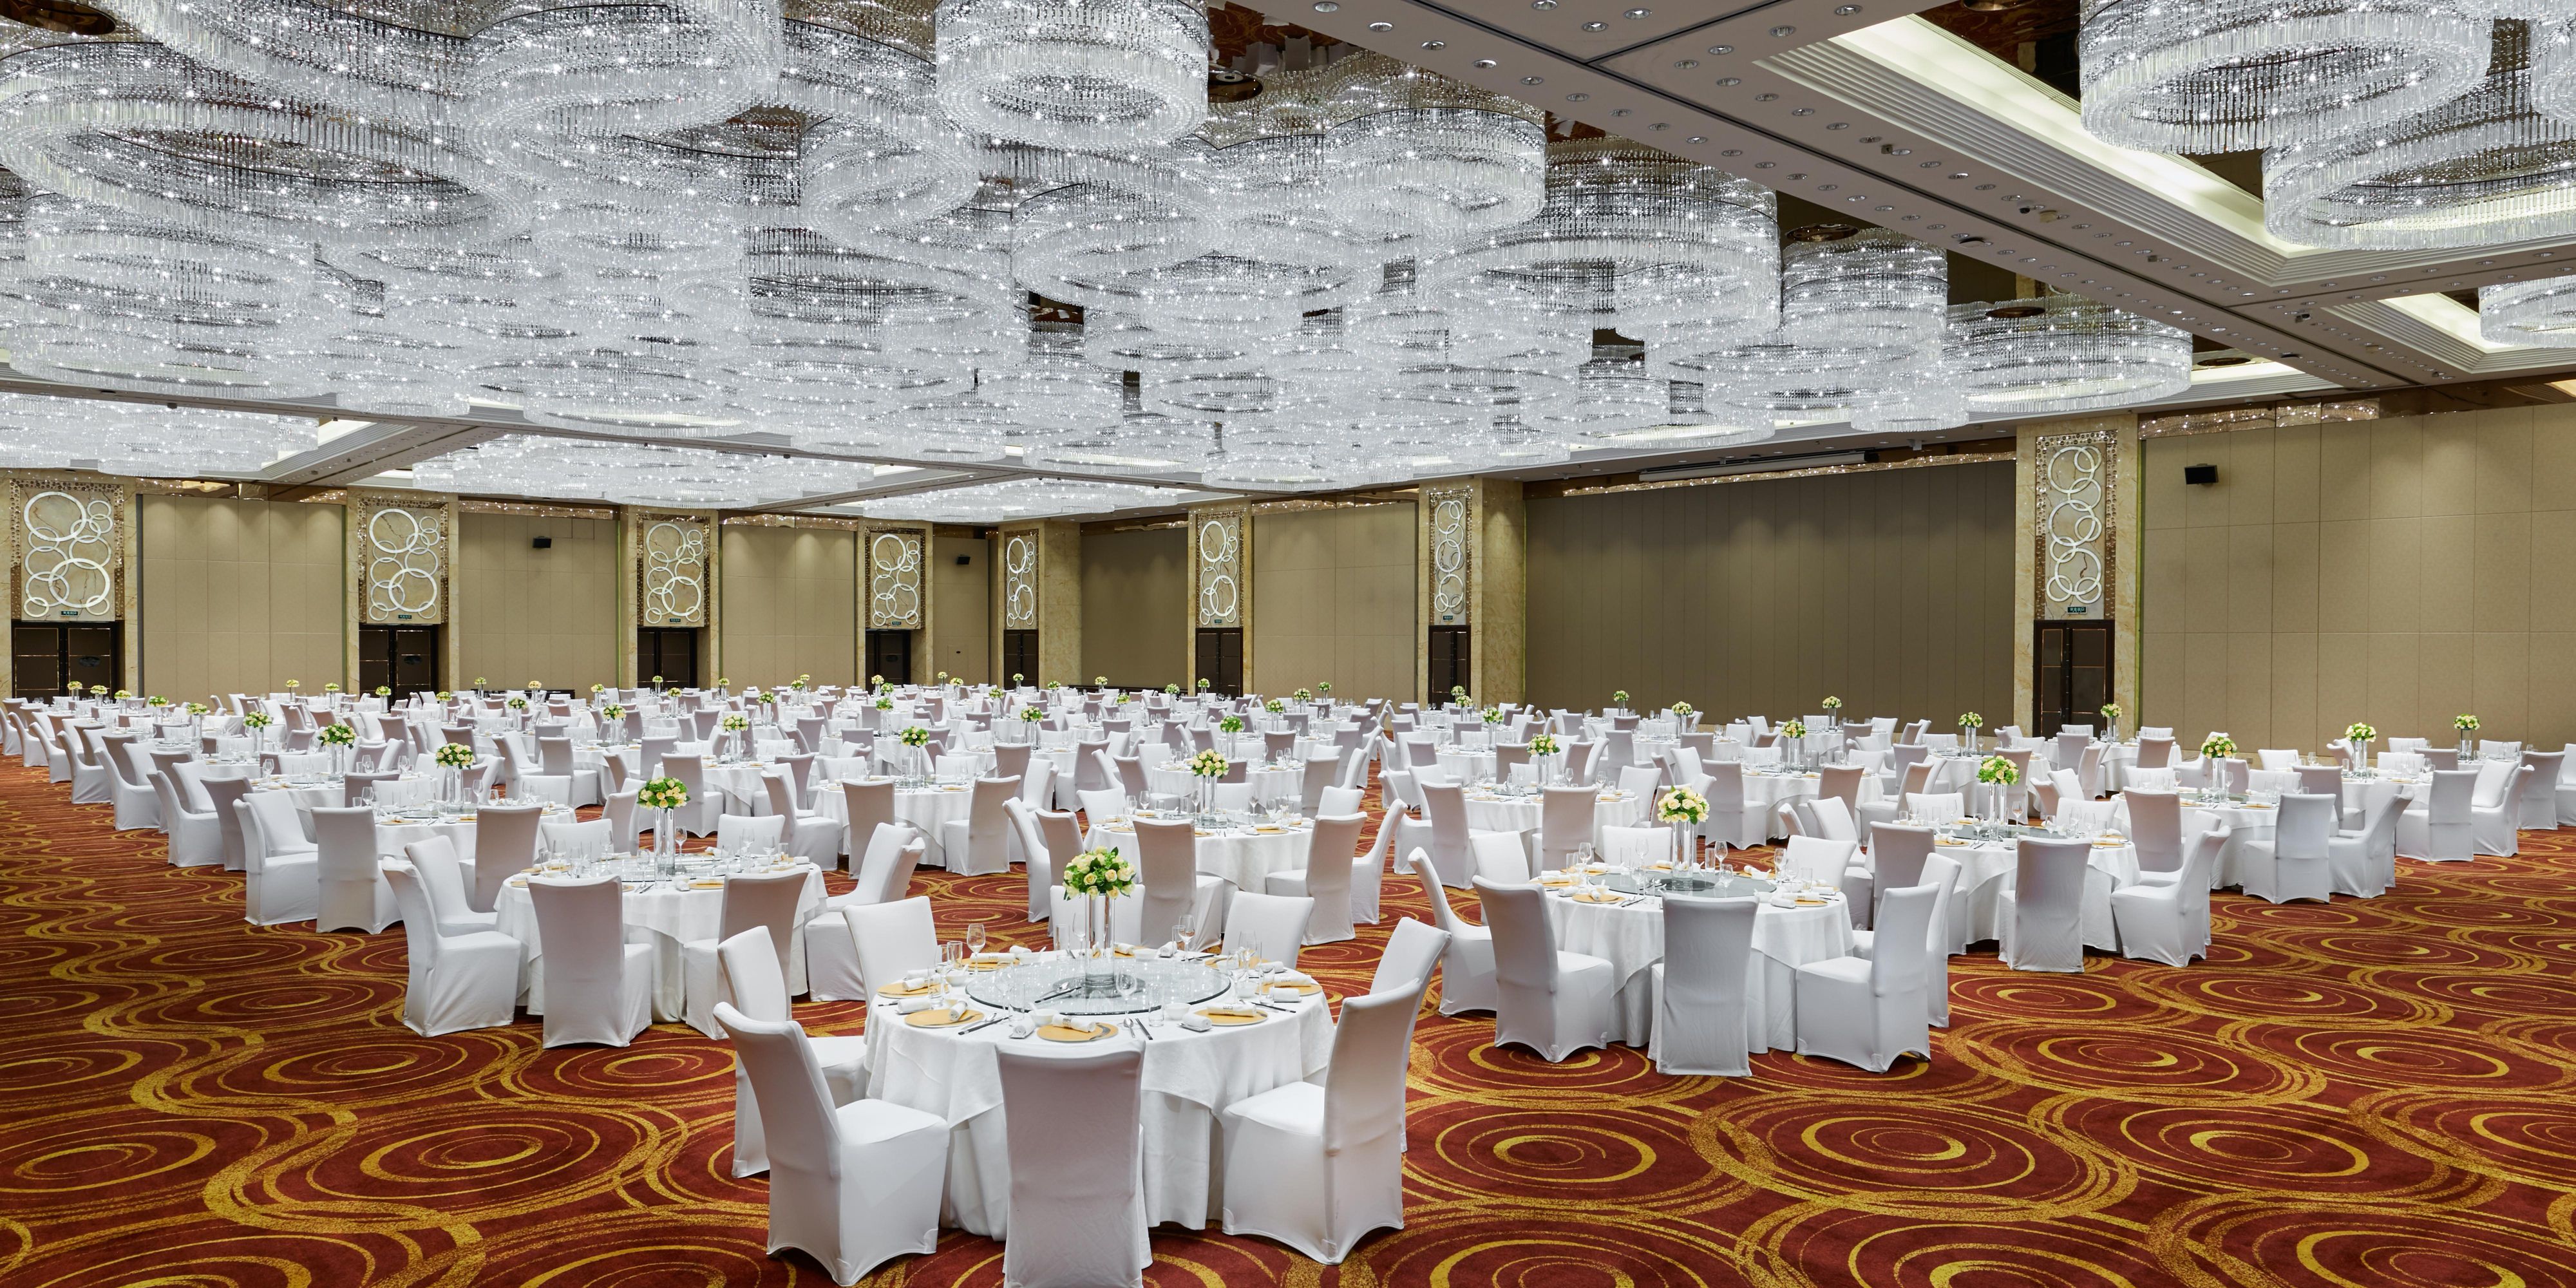 With its ideal location nearby Qiantang River and magnificent golden globe architecture, InterContinental Hangzhou is the setting for the city’s extraordinary weddings. 1780 m² Hangzhou Grand Ballroom and 943m² International hall, spacious pre-function area and private outdoor garden make InterContinental Hangzhou the preferred wedding venue.